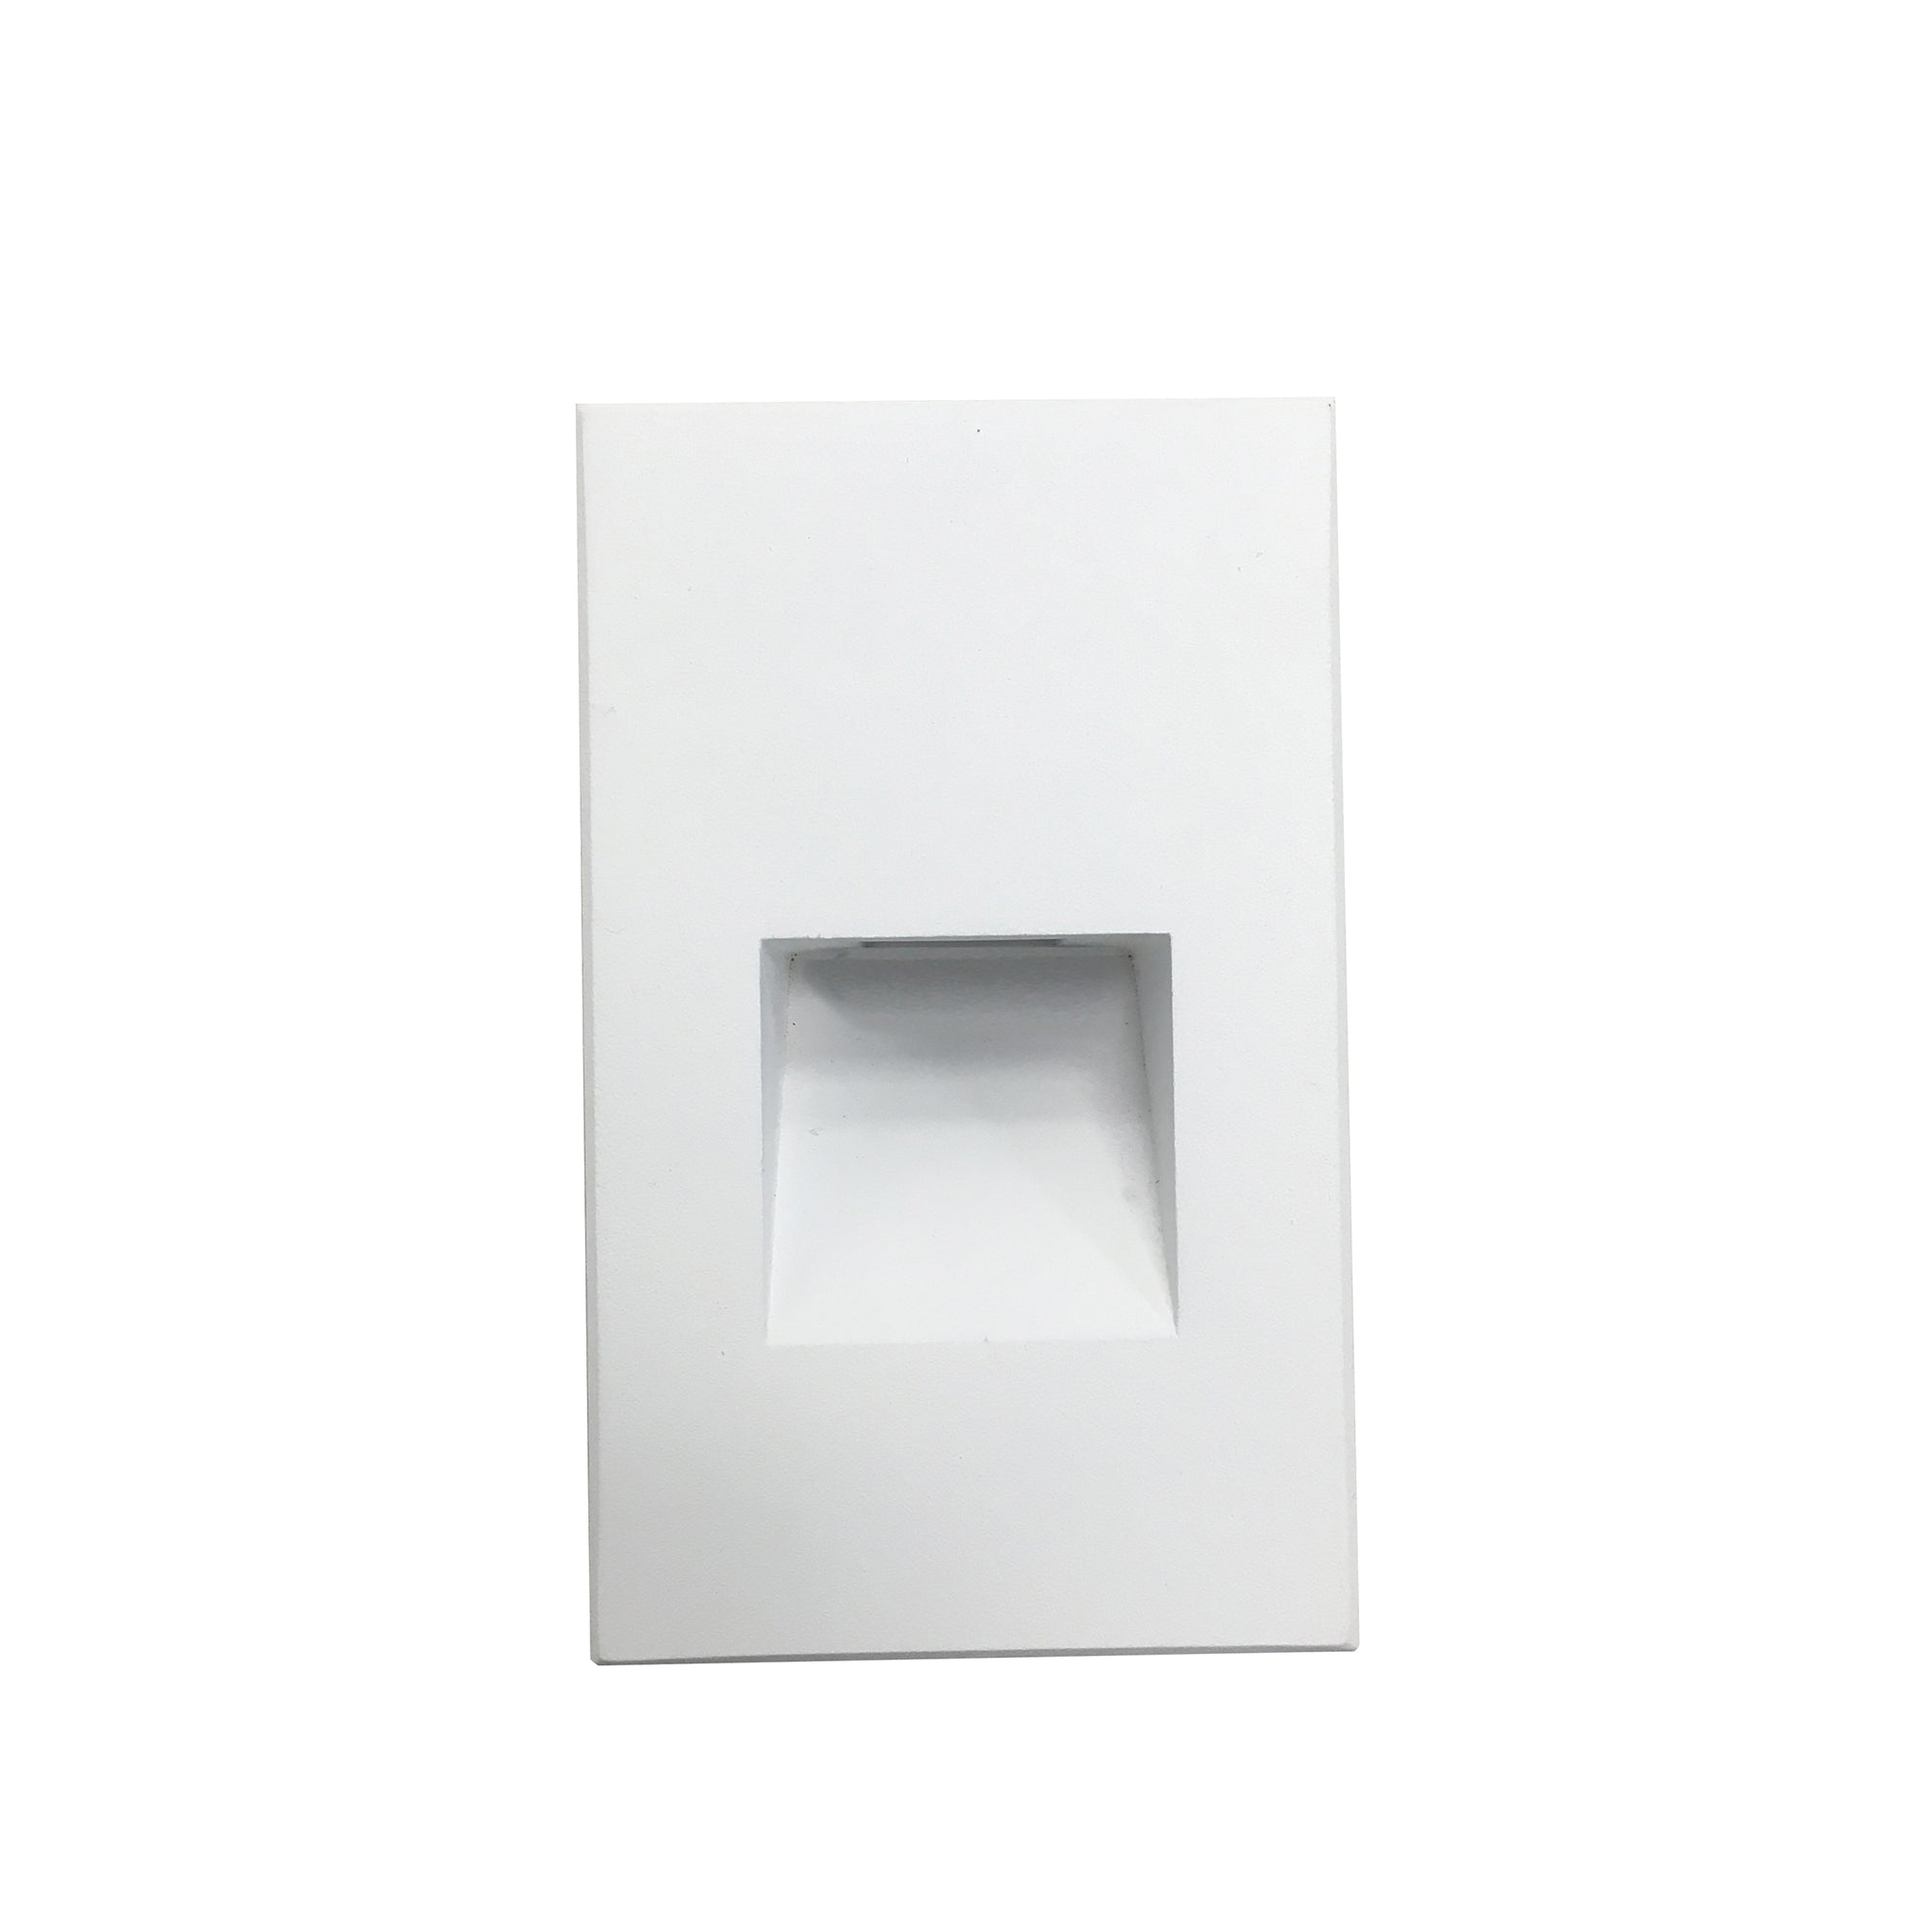 Nora Lighting NSW-730/30W - Step Light - Ari LED Step Light w/ Vertical Wall Wash Face Plate, 37lm / 2.5W, 3000K, White Finish